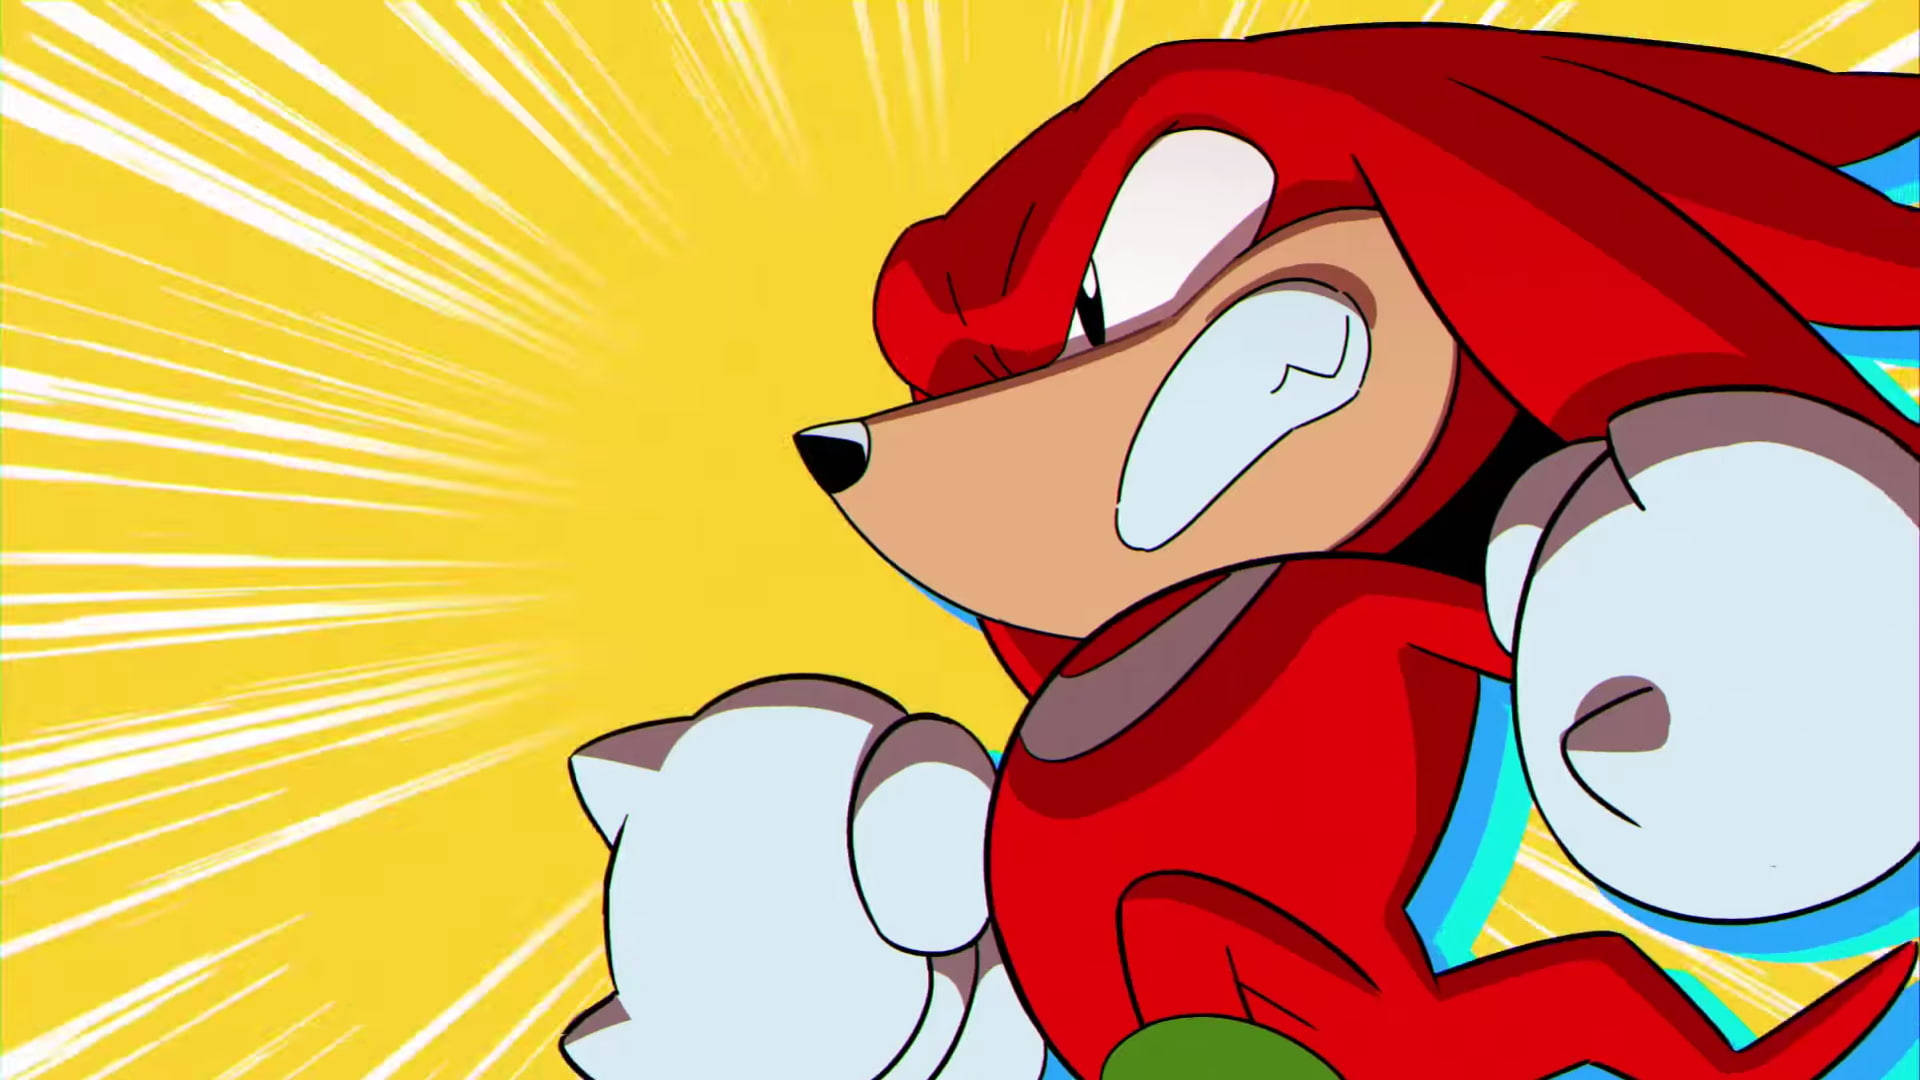 Knuckles The Echidna In A Dynamic Pose Against A Vibrant Yellow Background Background